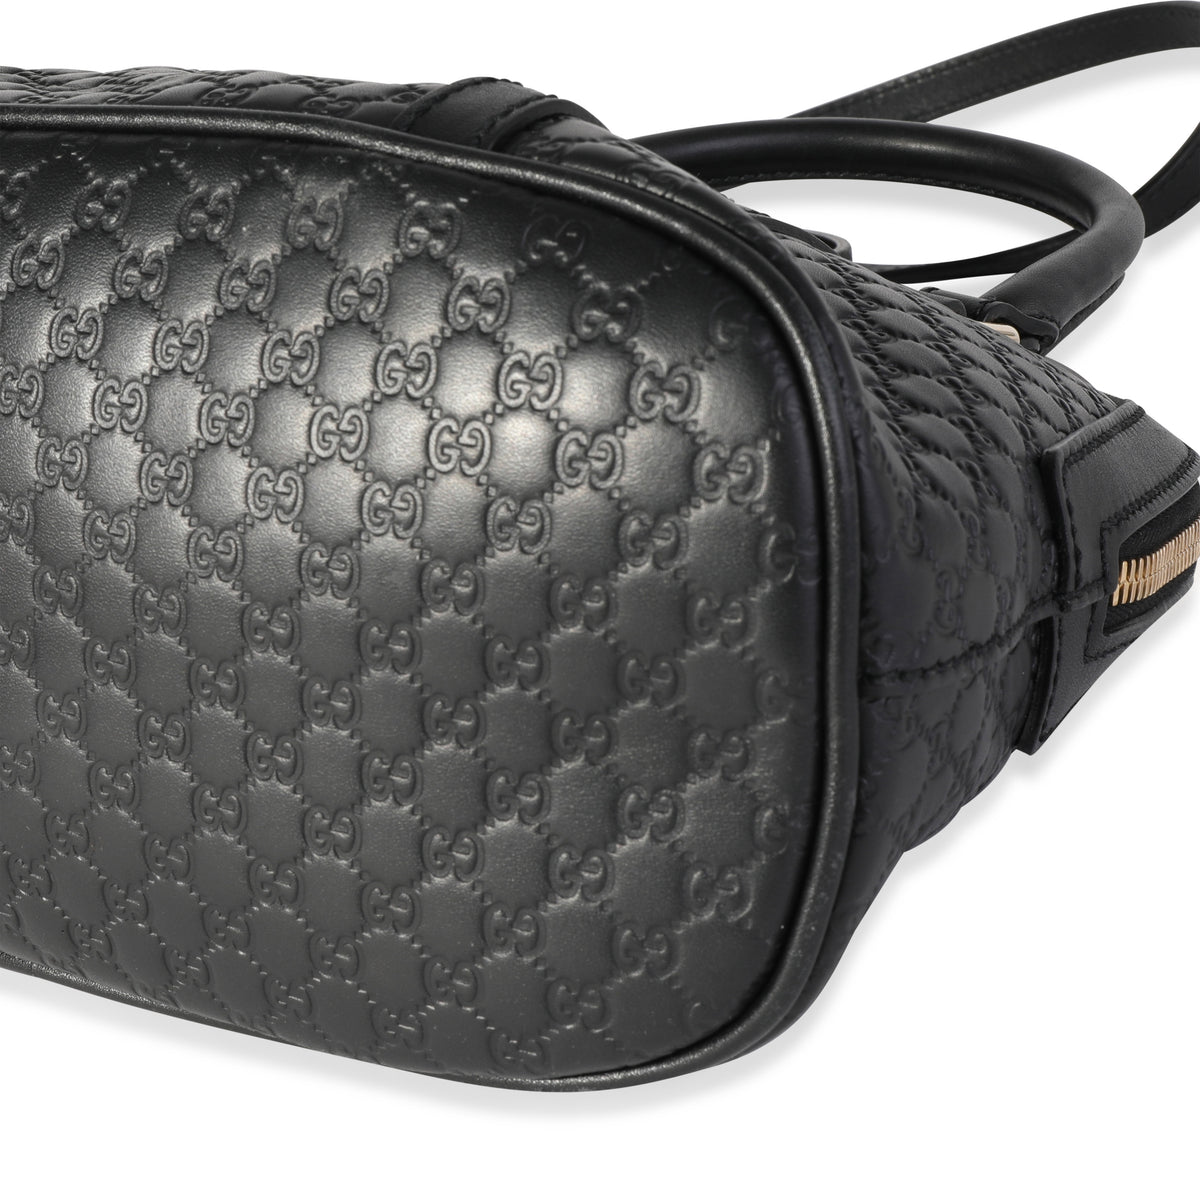 Gucci Dome Sling Bag MicroGuccissima Black in Leather with Gold